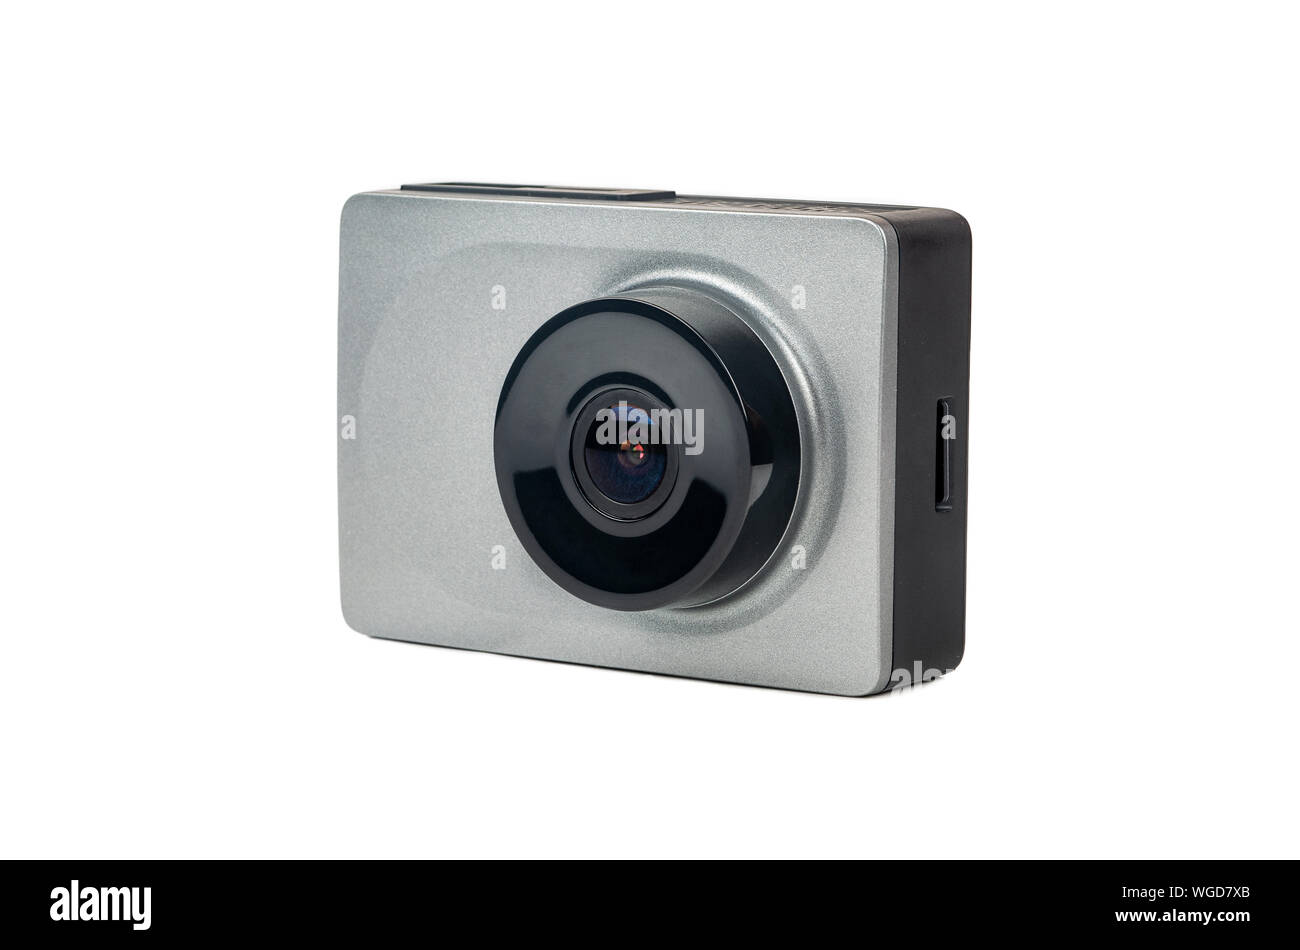 Grey car video recorder isolated on white background Stock Photo